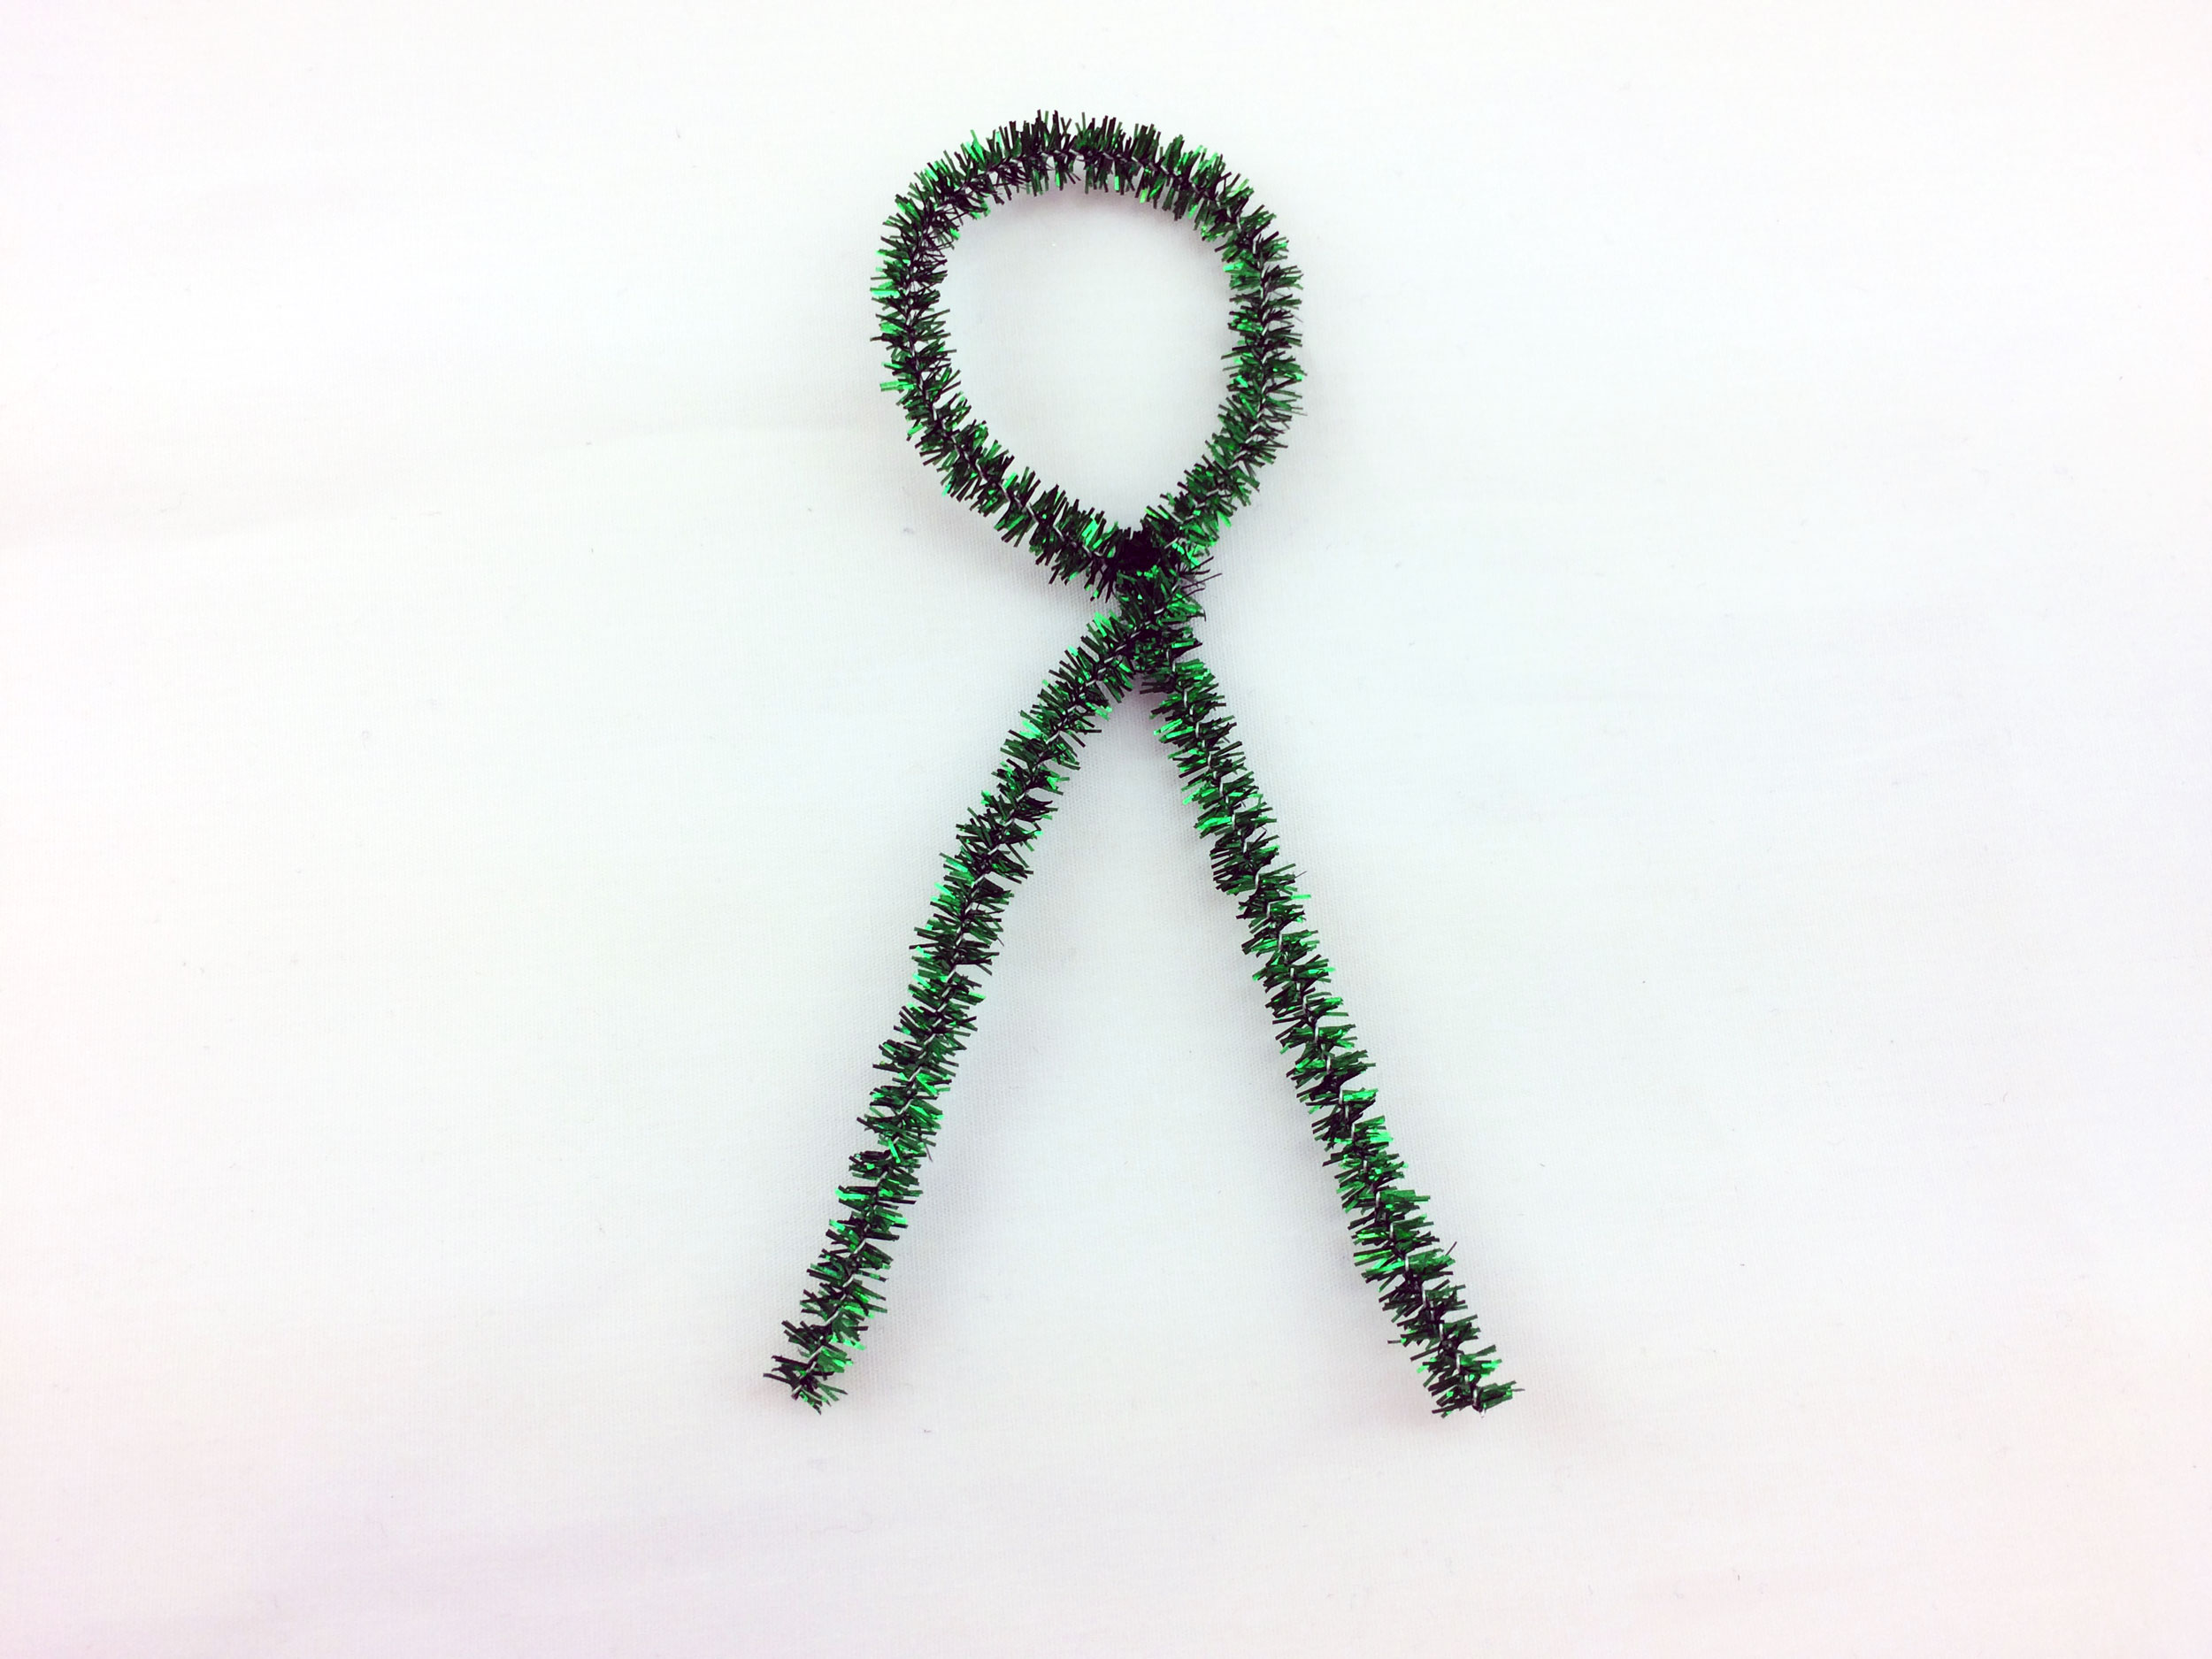 Fold pipe cleaner to create cherry stem and ornament loop | Ornament Shop